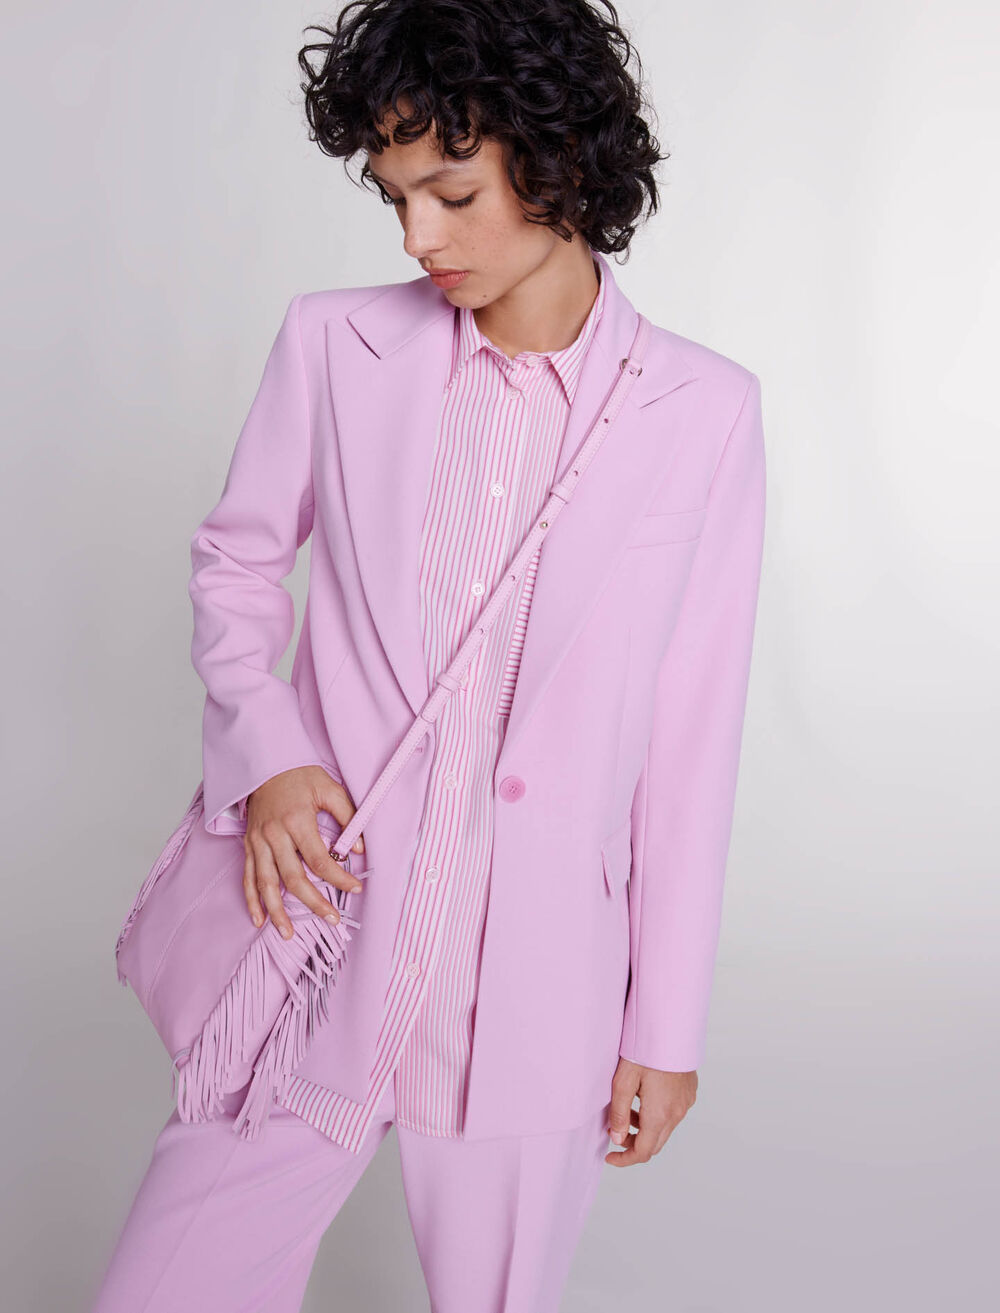 Pale Pink-featured-Fitted suit jacket